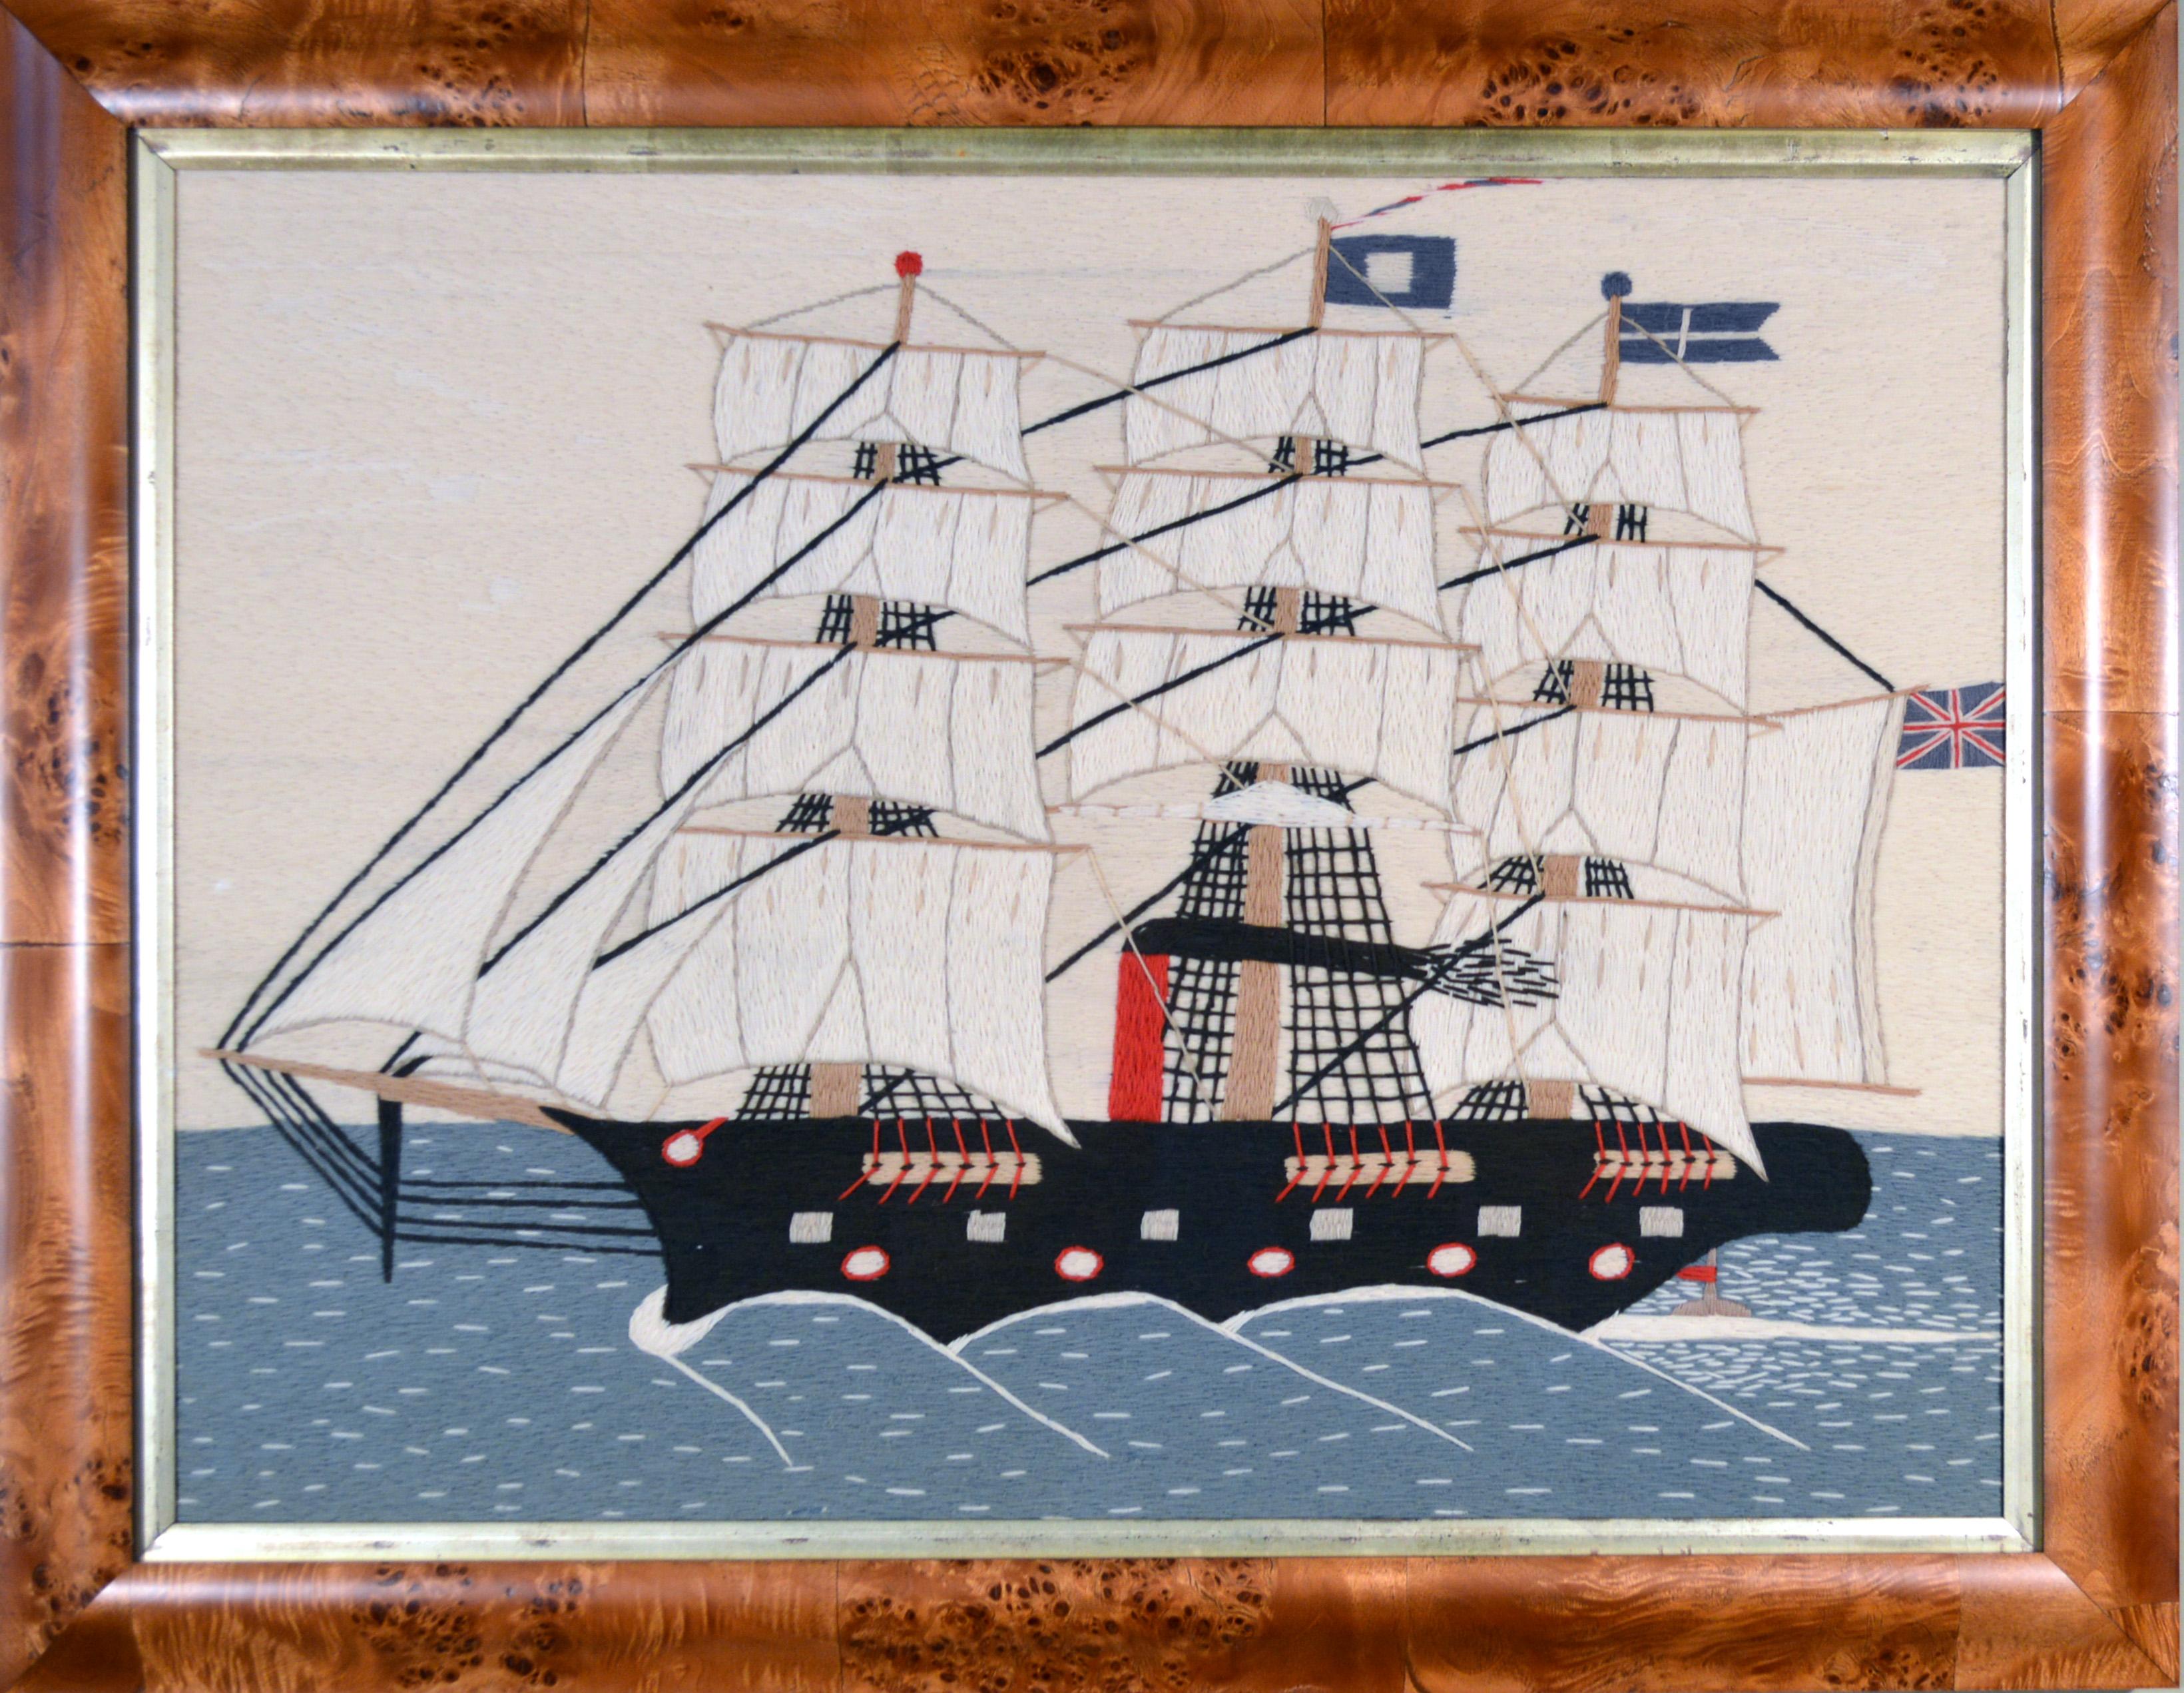 Folk Art Sailor's Woolwork or Woolie of a Ship,
Circa 1875-95.

The large sailor's charming naive woolie depicts a large port-side view of a ship underway with both steam and sail power.  Smoke is issuing from a tall narrow red funnel as she sails